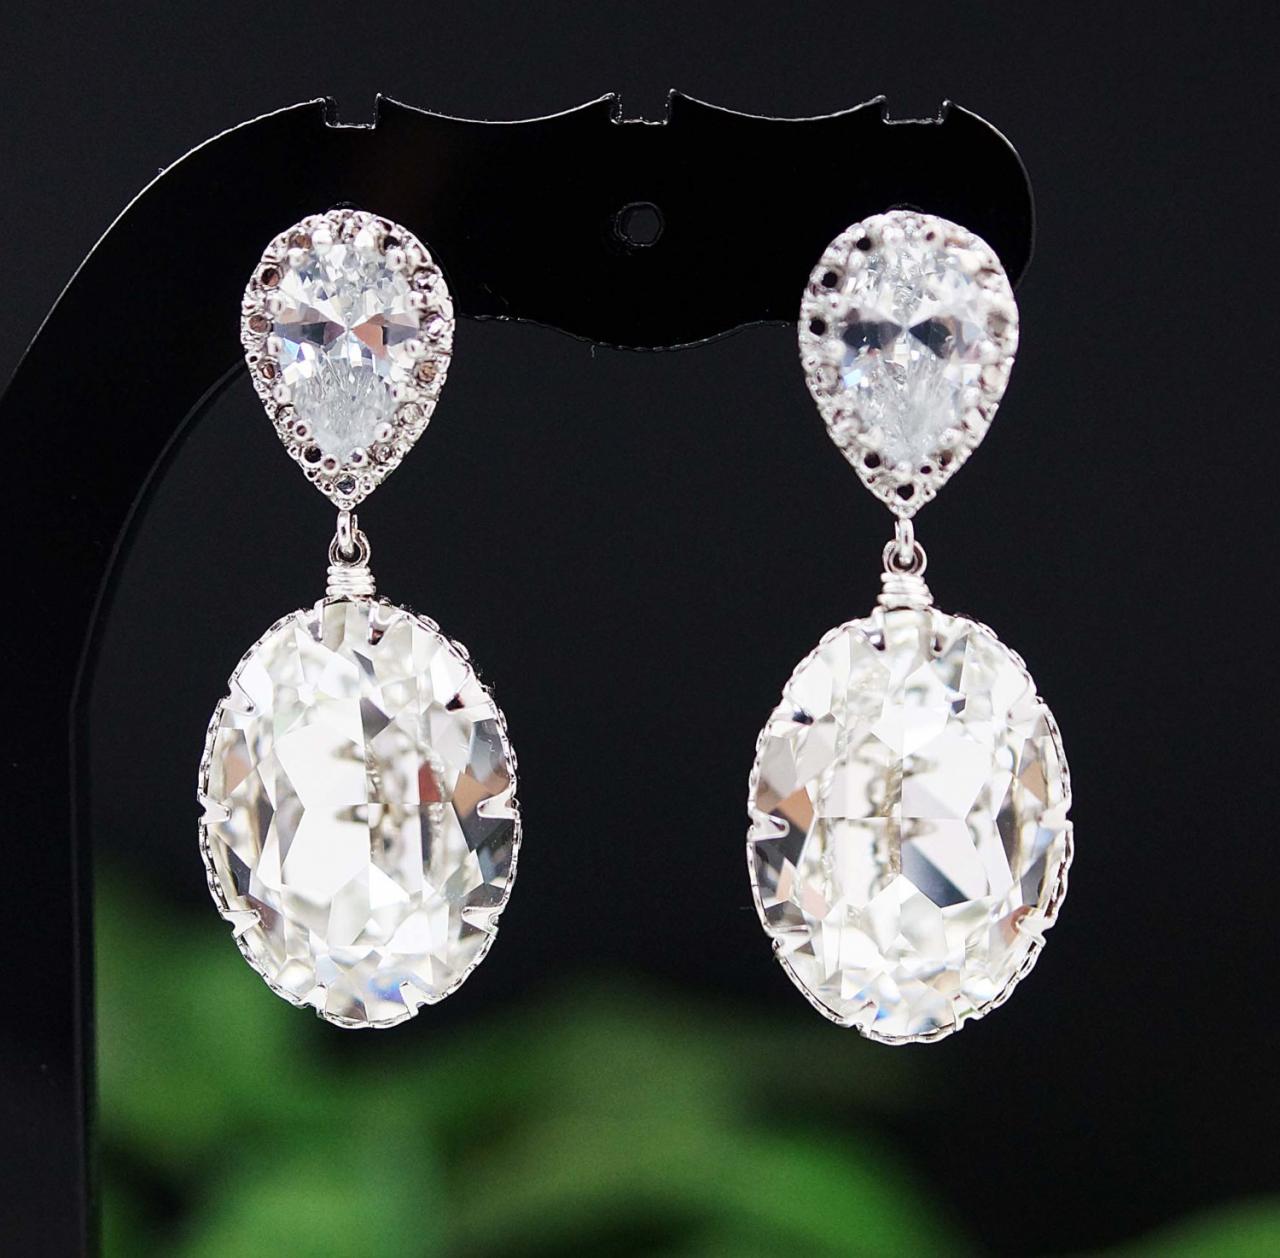 Wedding Jewelry Bridal Earrings Bridesmaid Earrings Cubic Zirconia Ear Posts With Clear White Swarovski Crystal Oval Drops